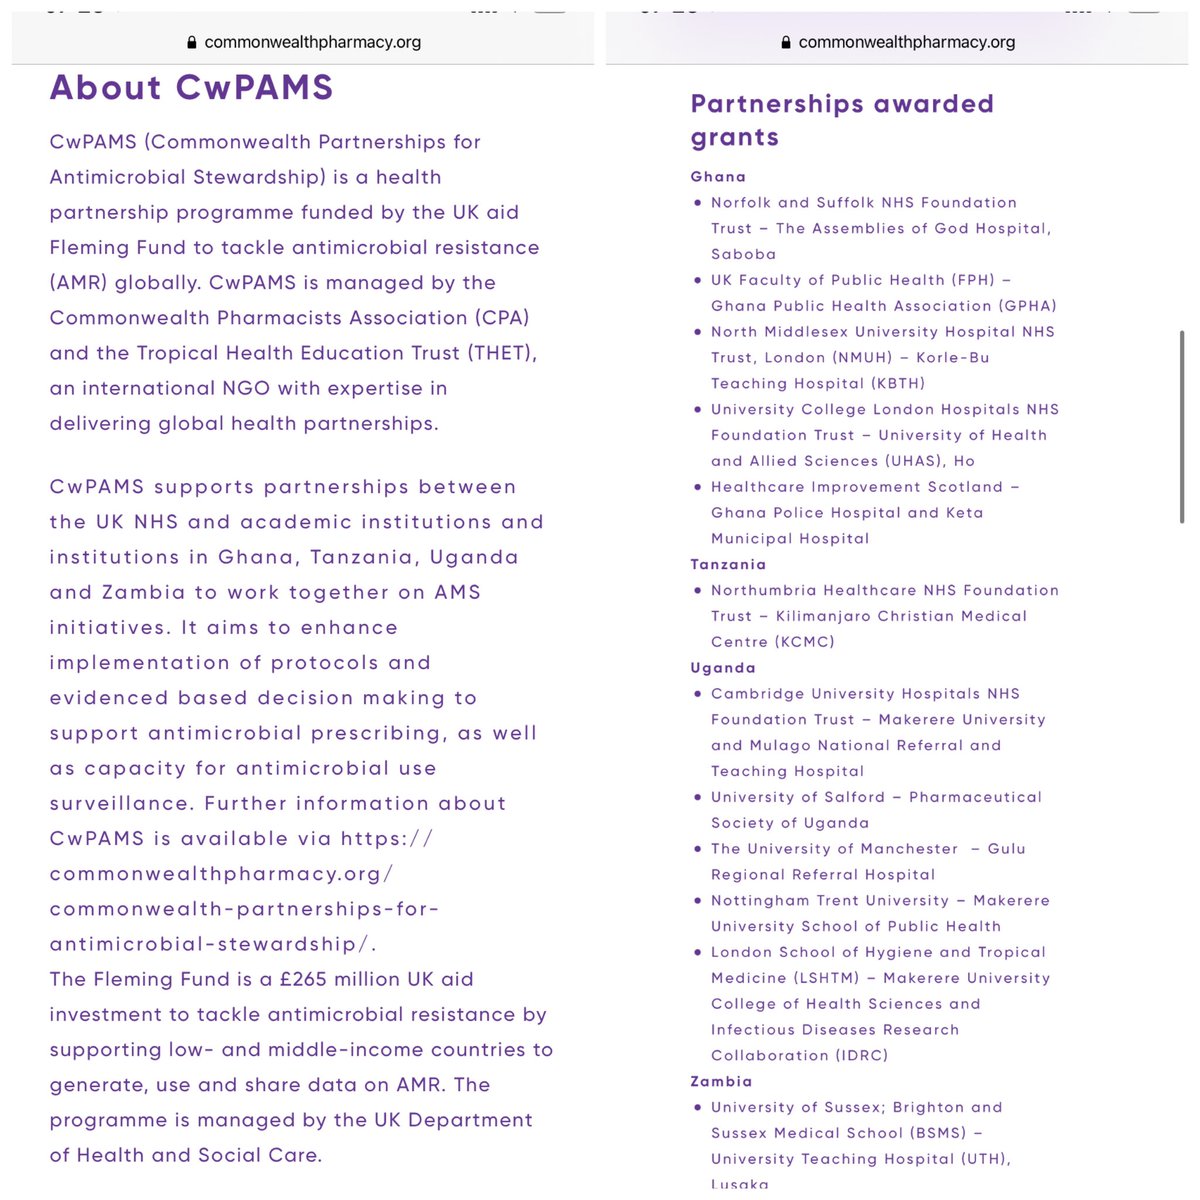 Recent #CwPAMS peer reviewed publications. 
Thank you to all members of the health partnerships in UK, Ghana, Uganda, Tanzania & Zambia.

#CwPAMS is health partnership approach to support AMS. Funding: @UKaid @FlemingFund; managed by @CW_Pharmacists & @THETlinks
cc #CPhOGHFellows